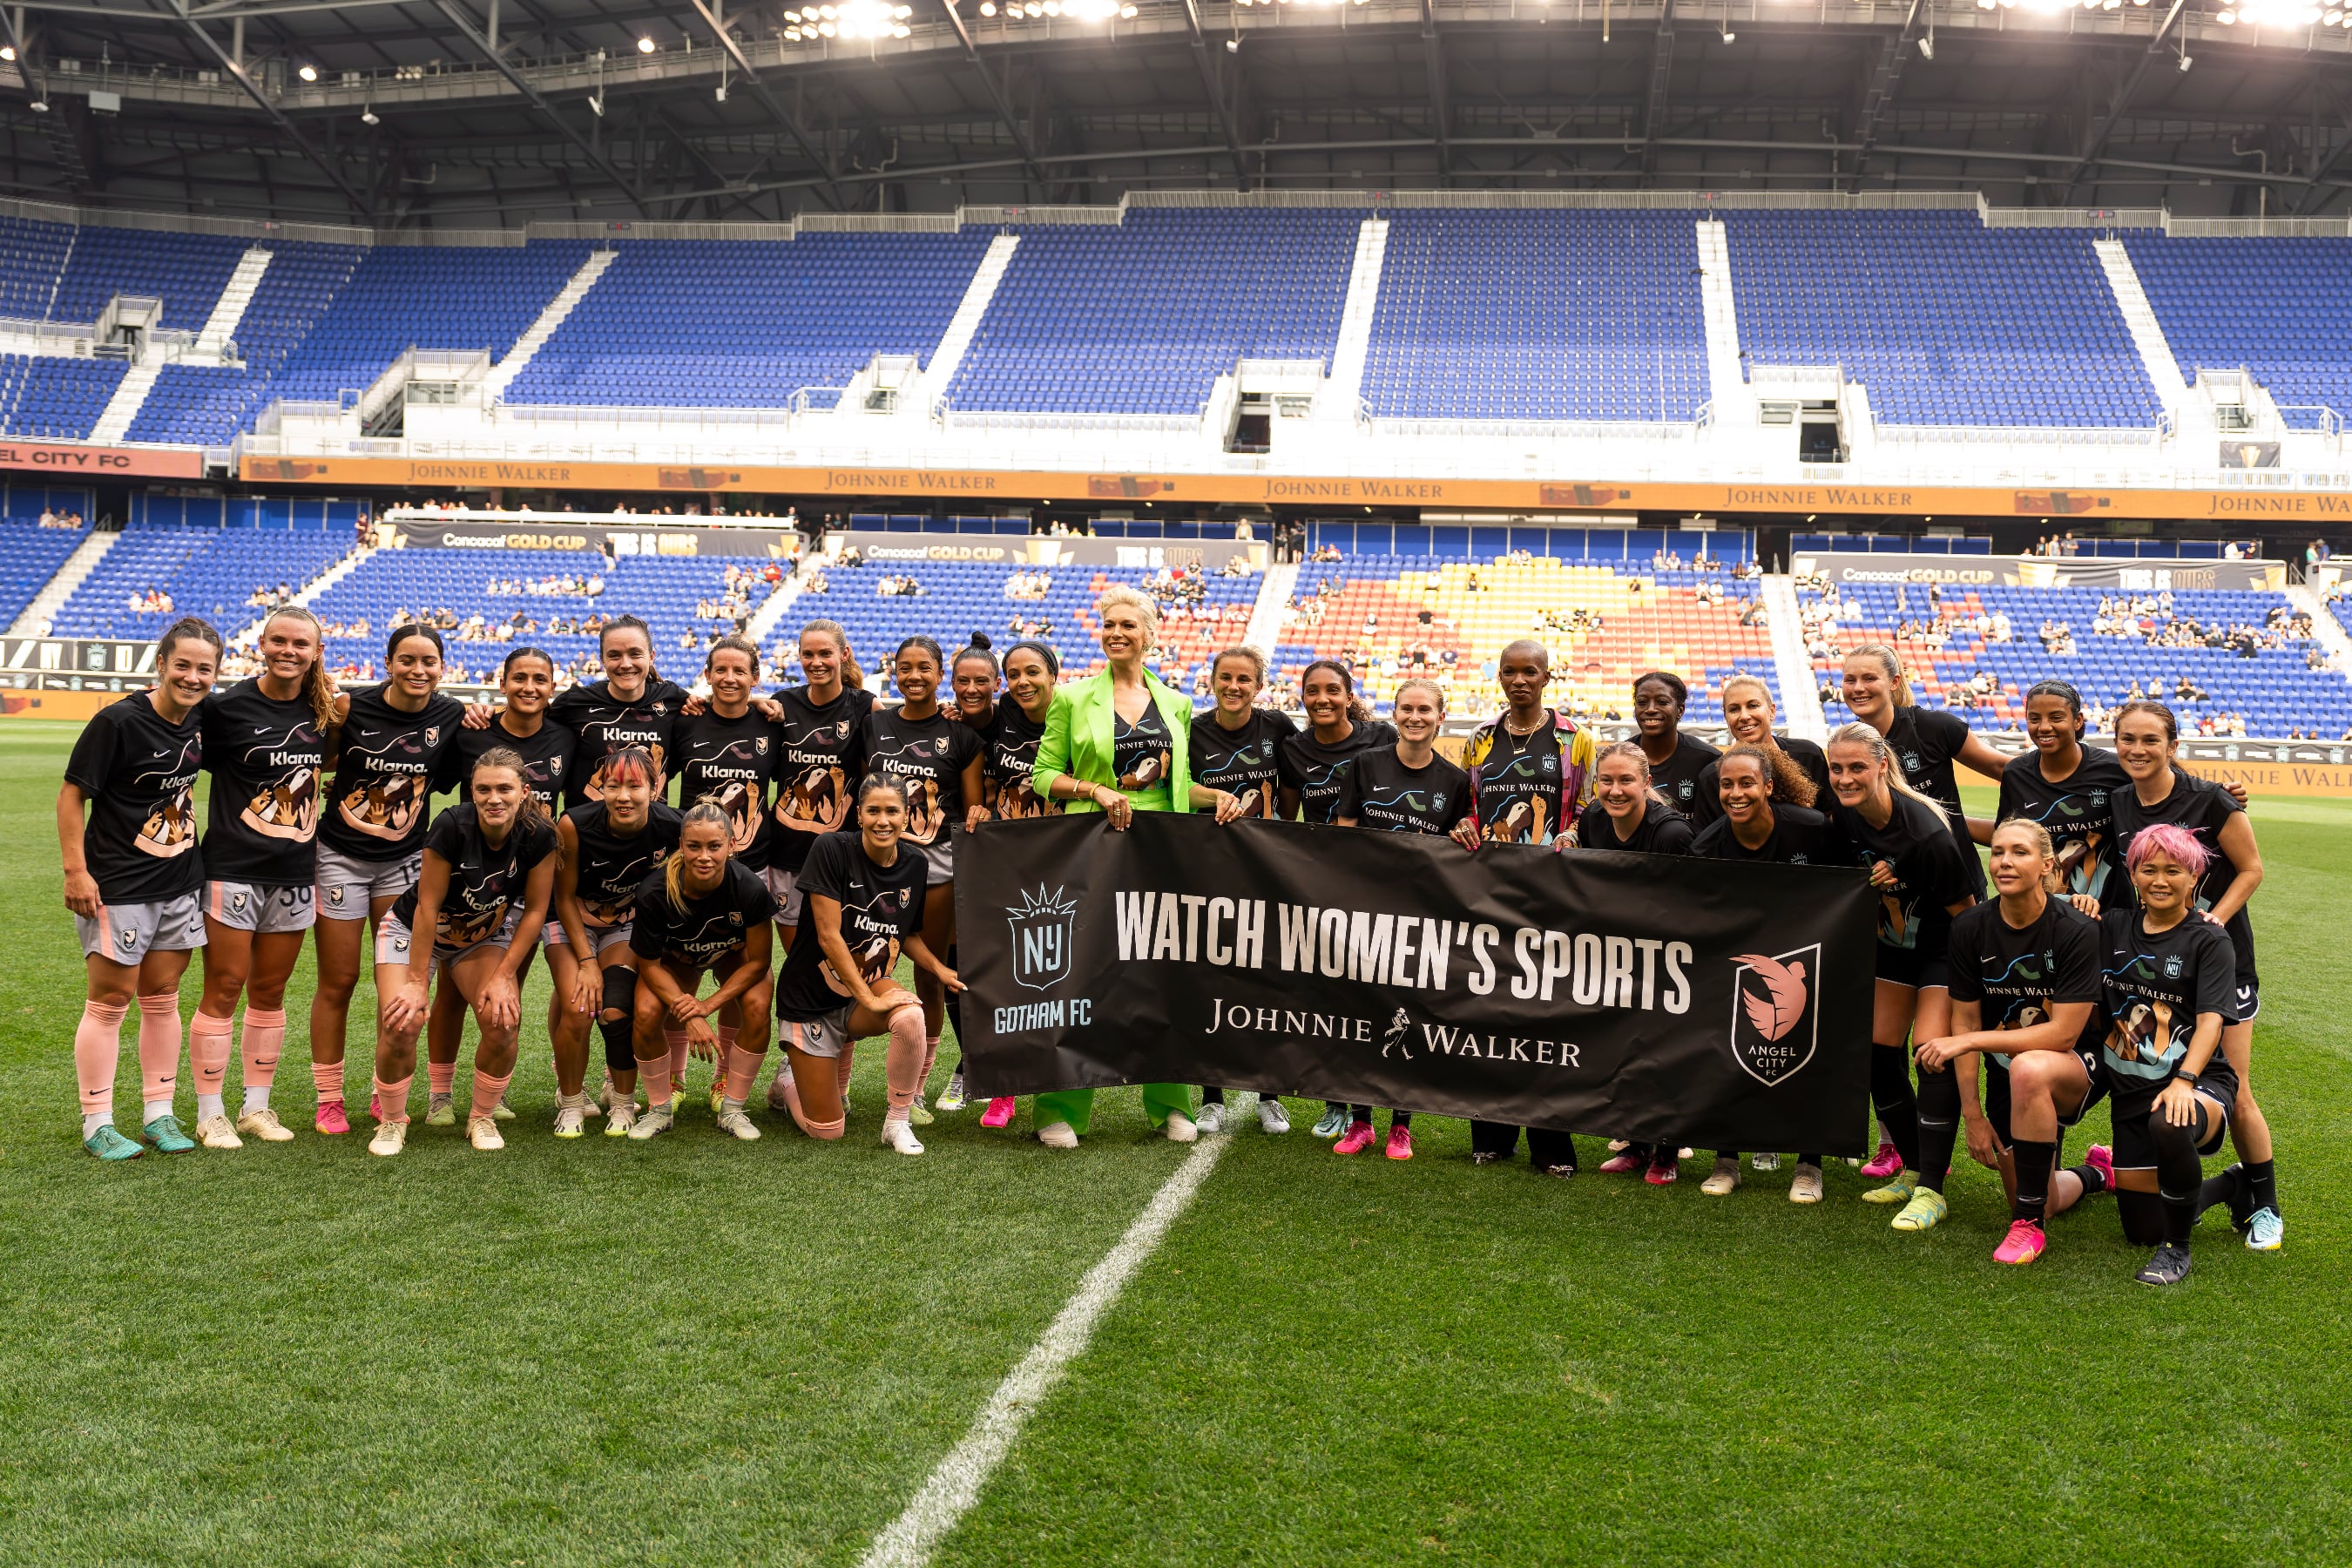 Hannah Waddingham and Monica Ahanonu join Gotham FC and Angel City FC players to present the Watch Women's Sports banner during the July 2nd Women's Empowerment Game presented by Johnnie Walker at Red Bull Arena